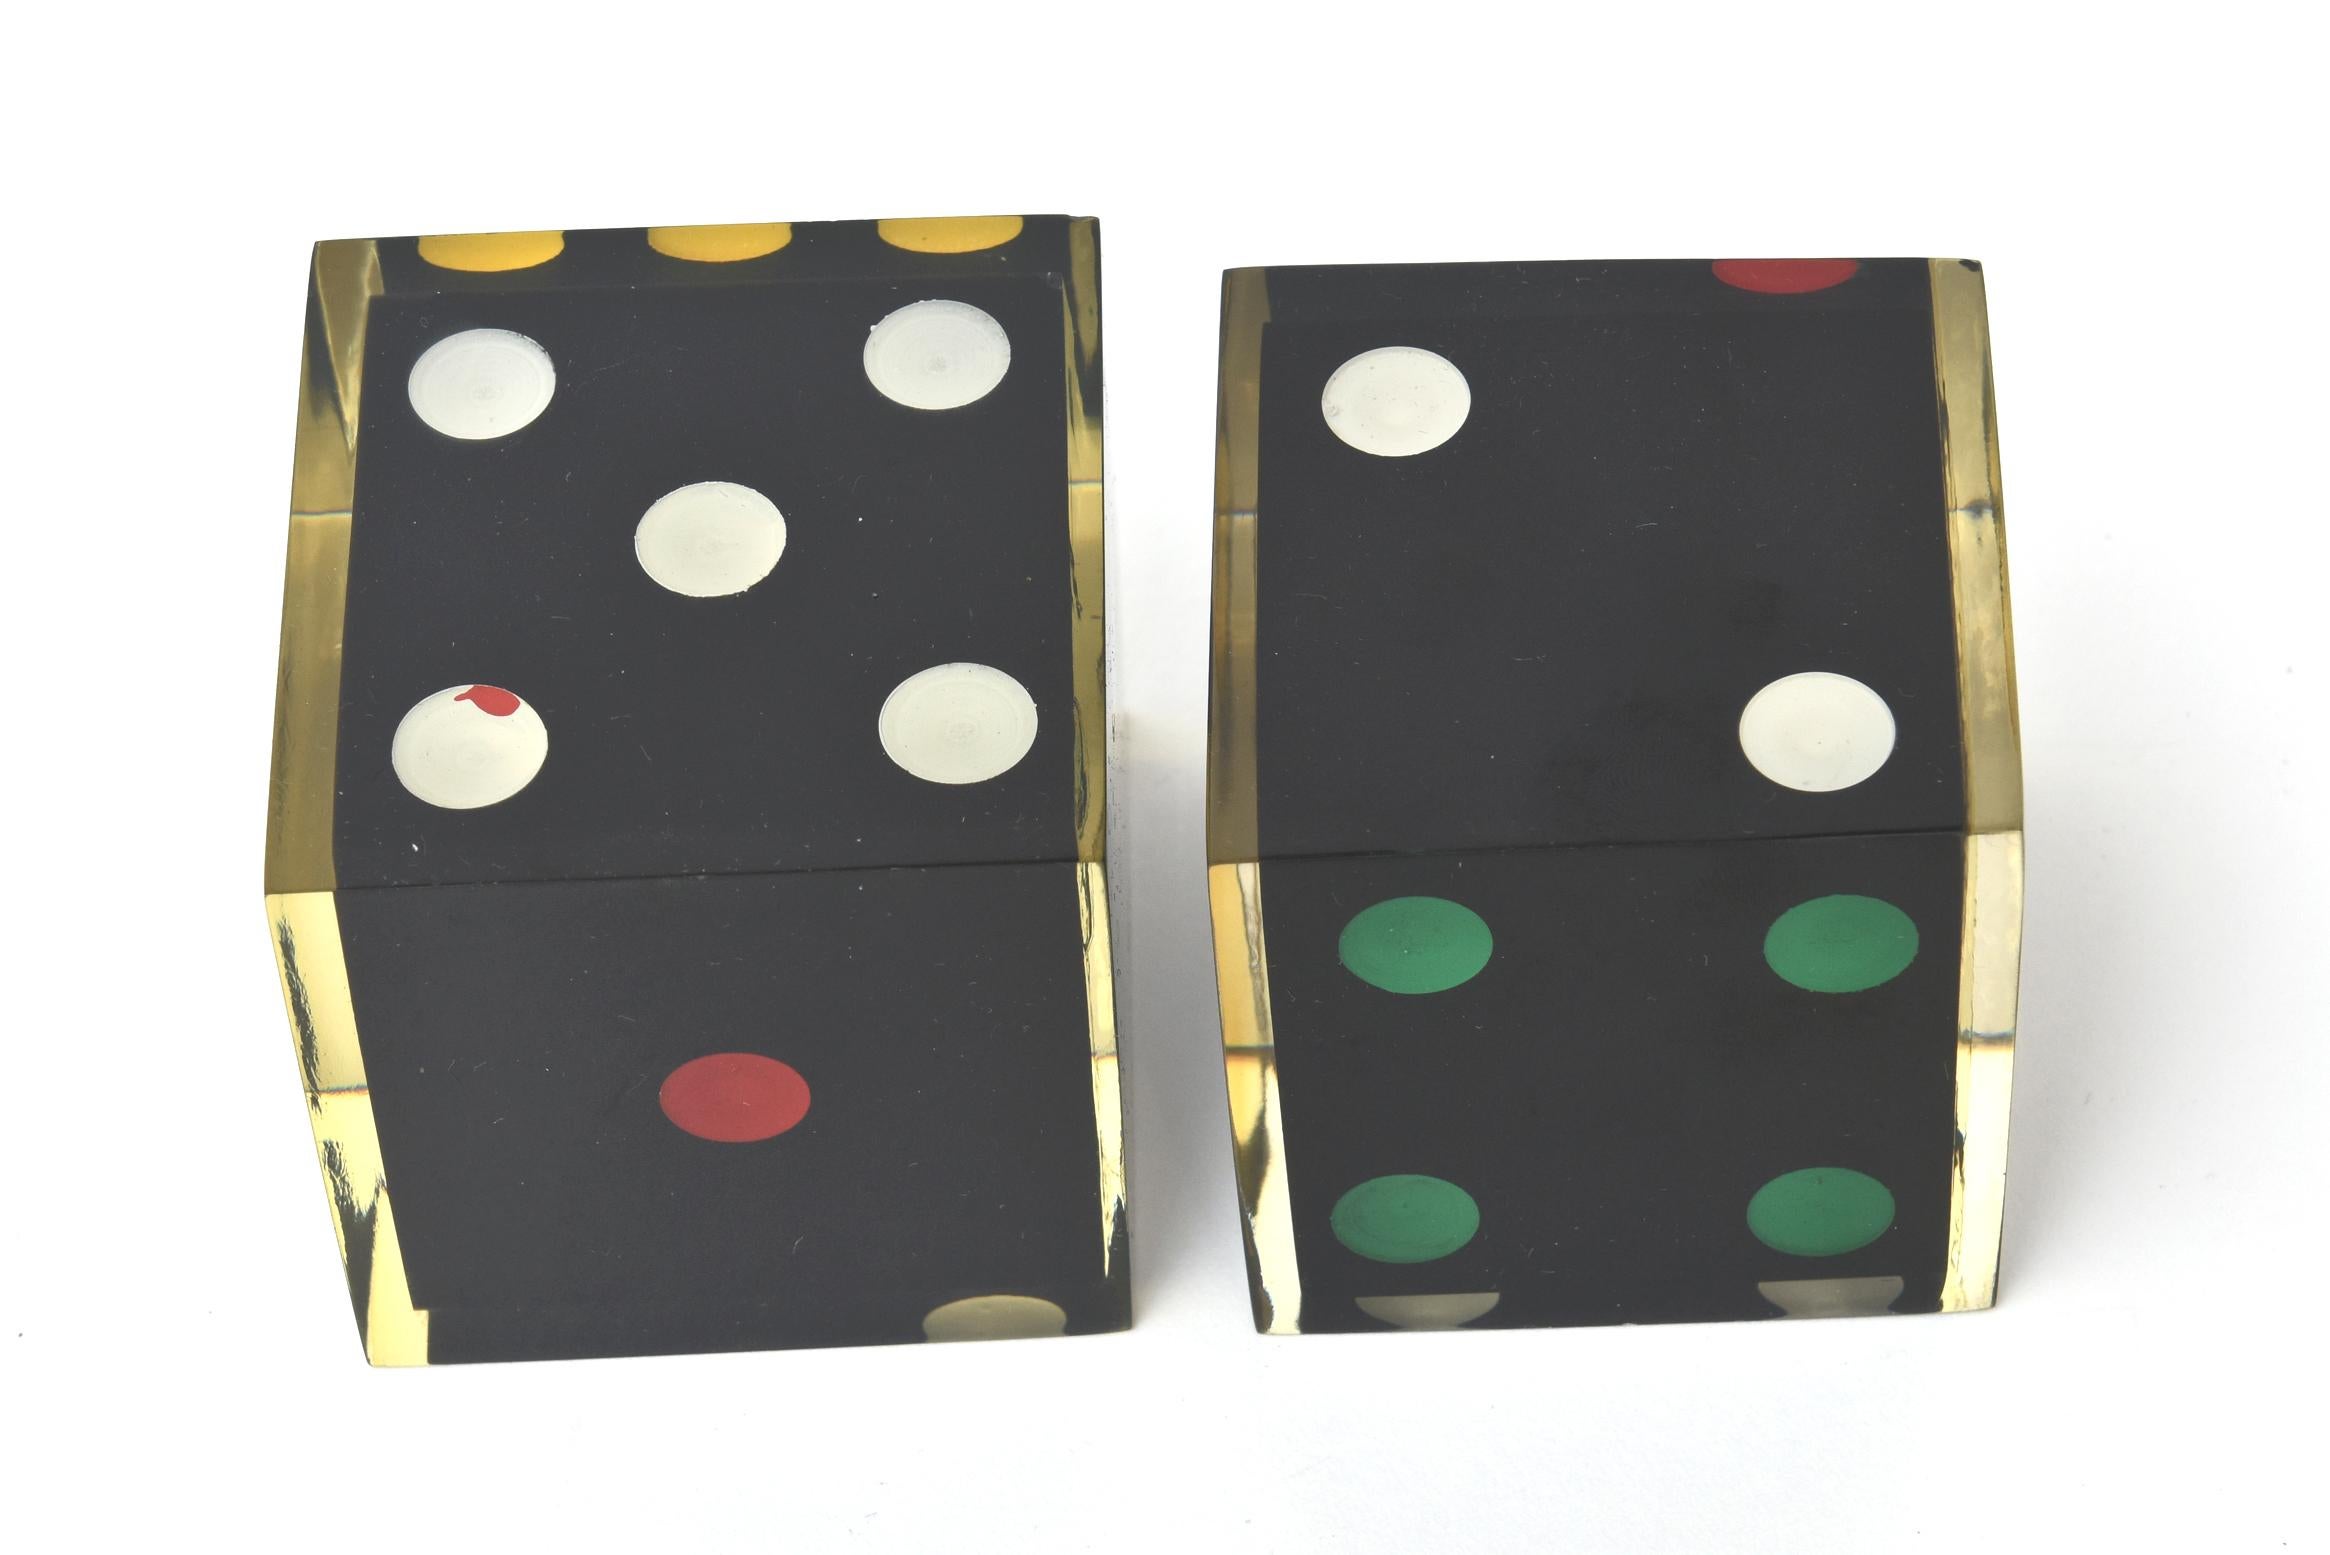 French Vintage Large Sculptural Dice Black, Red, Green, Yellow and White Pair of 2